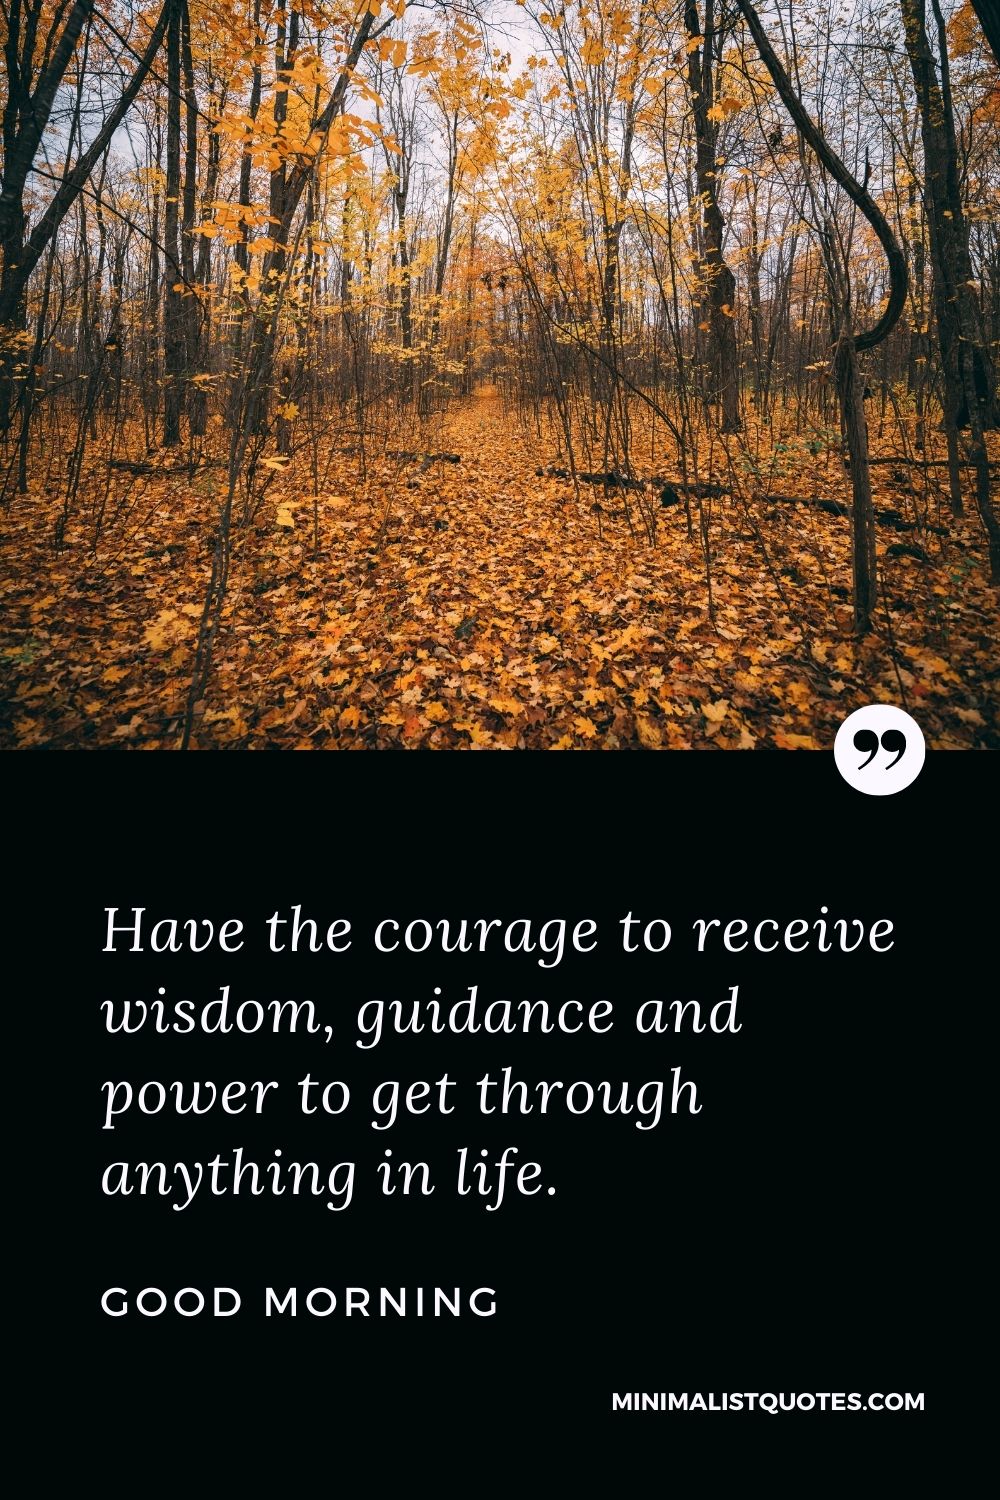 Good Morning Wish & Message With Image: Have the courage to receive wisdom, guidance and power to get through anything in life.